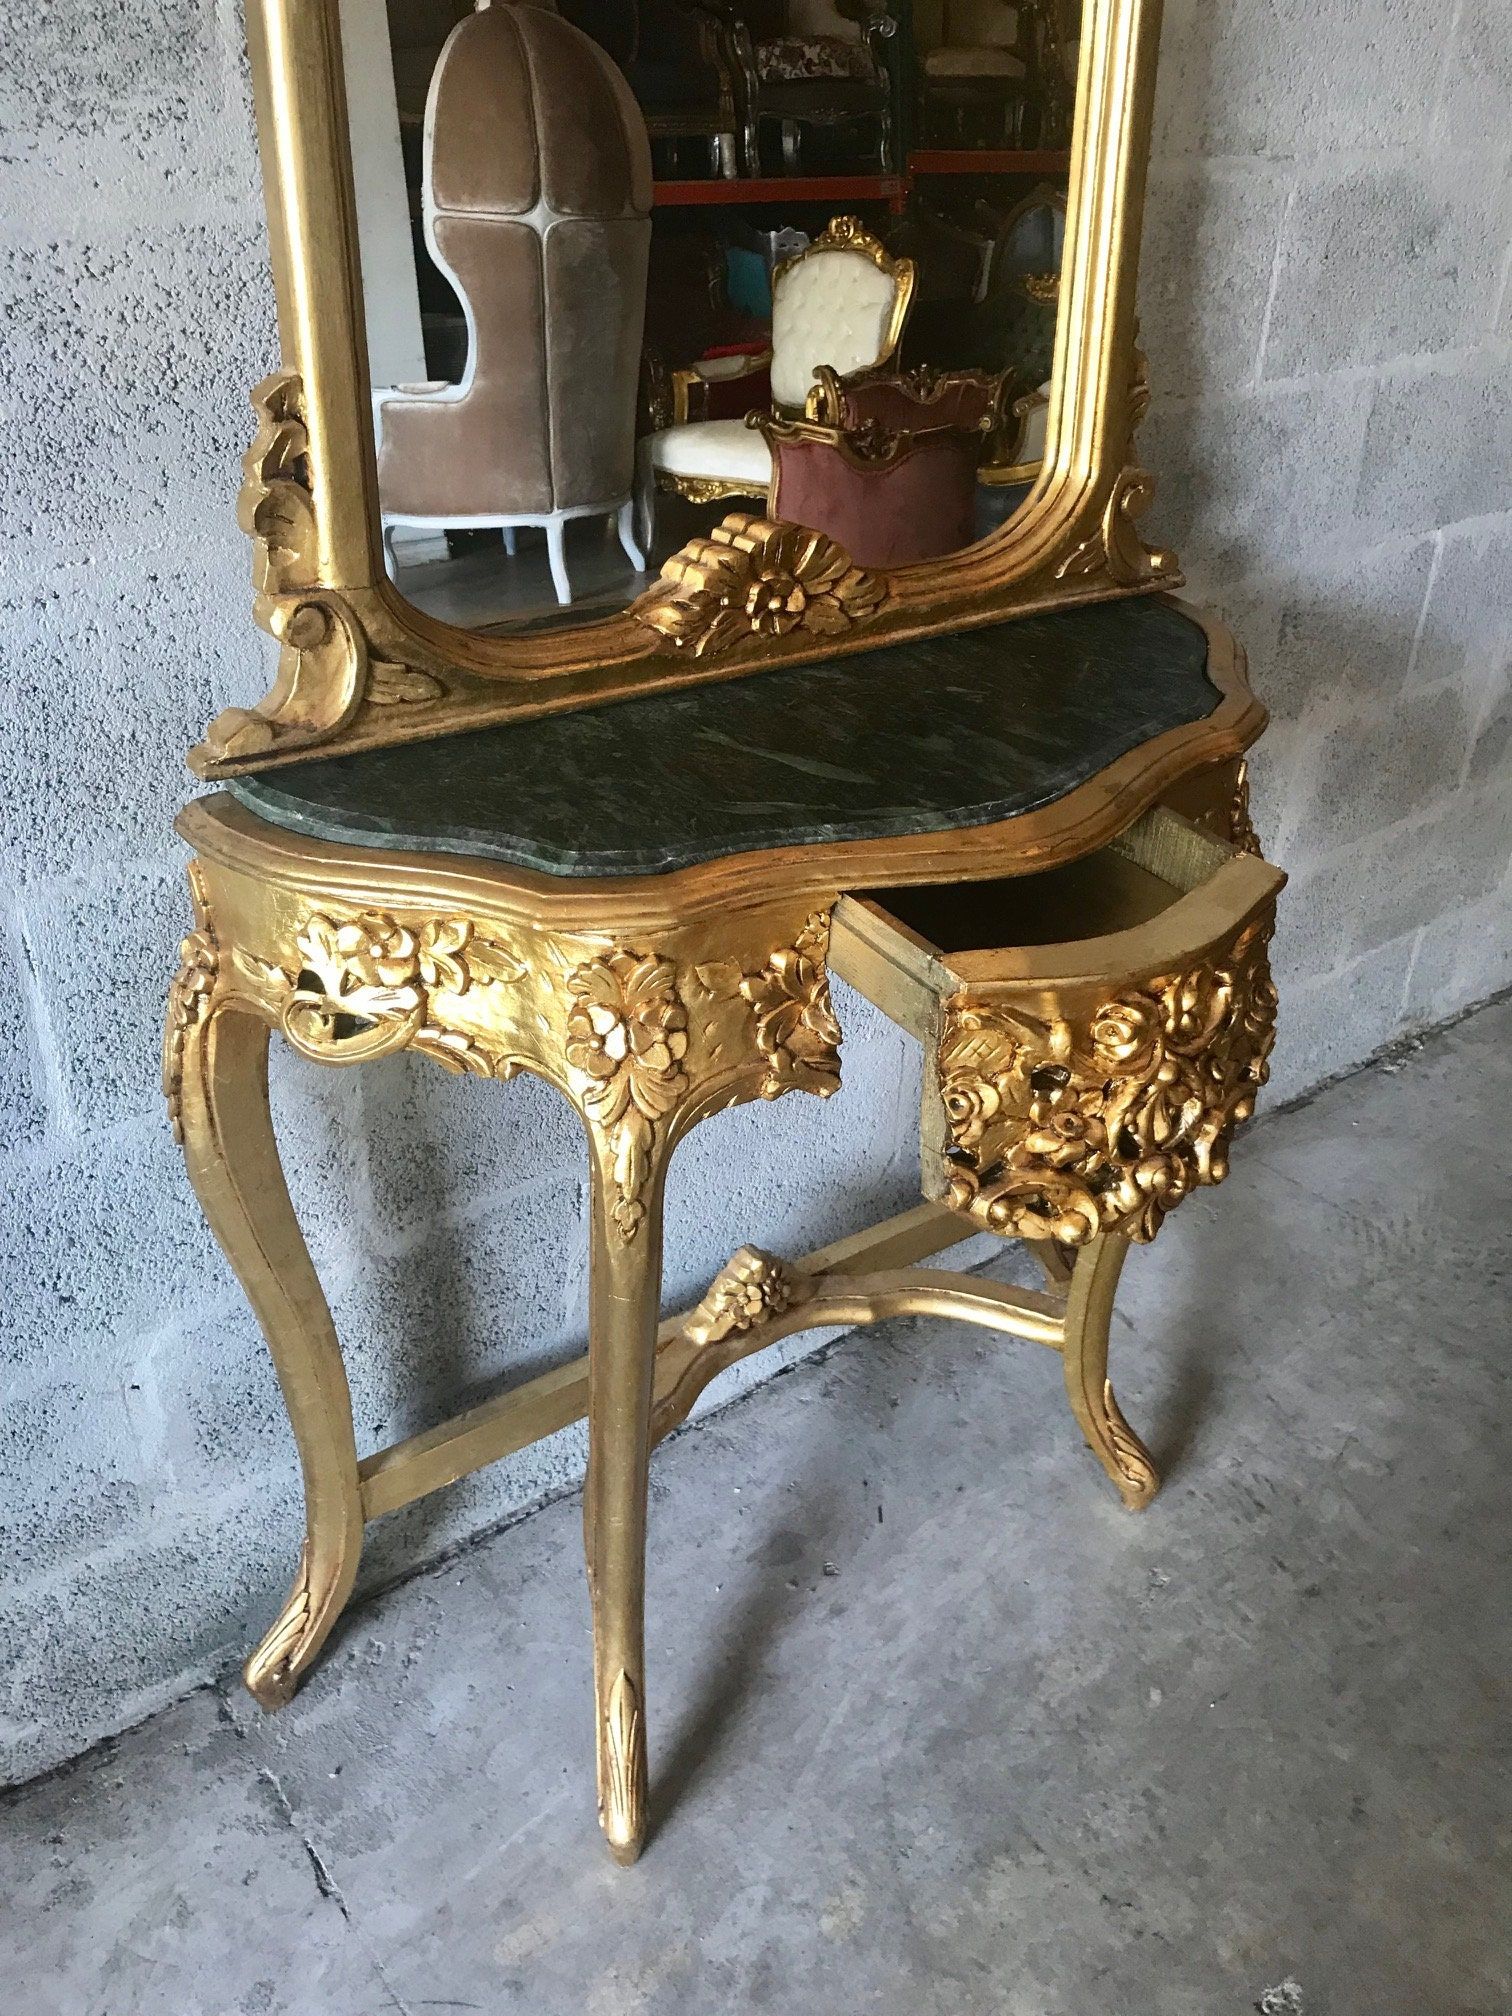 French Console French Furniture Baroque Table 87h X 36w Rococo Console Inside Antique Mirror Console Tables (View 3 of 20)